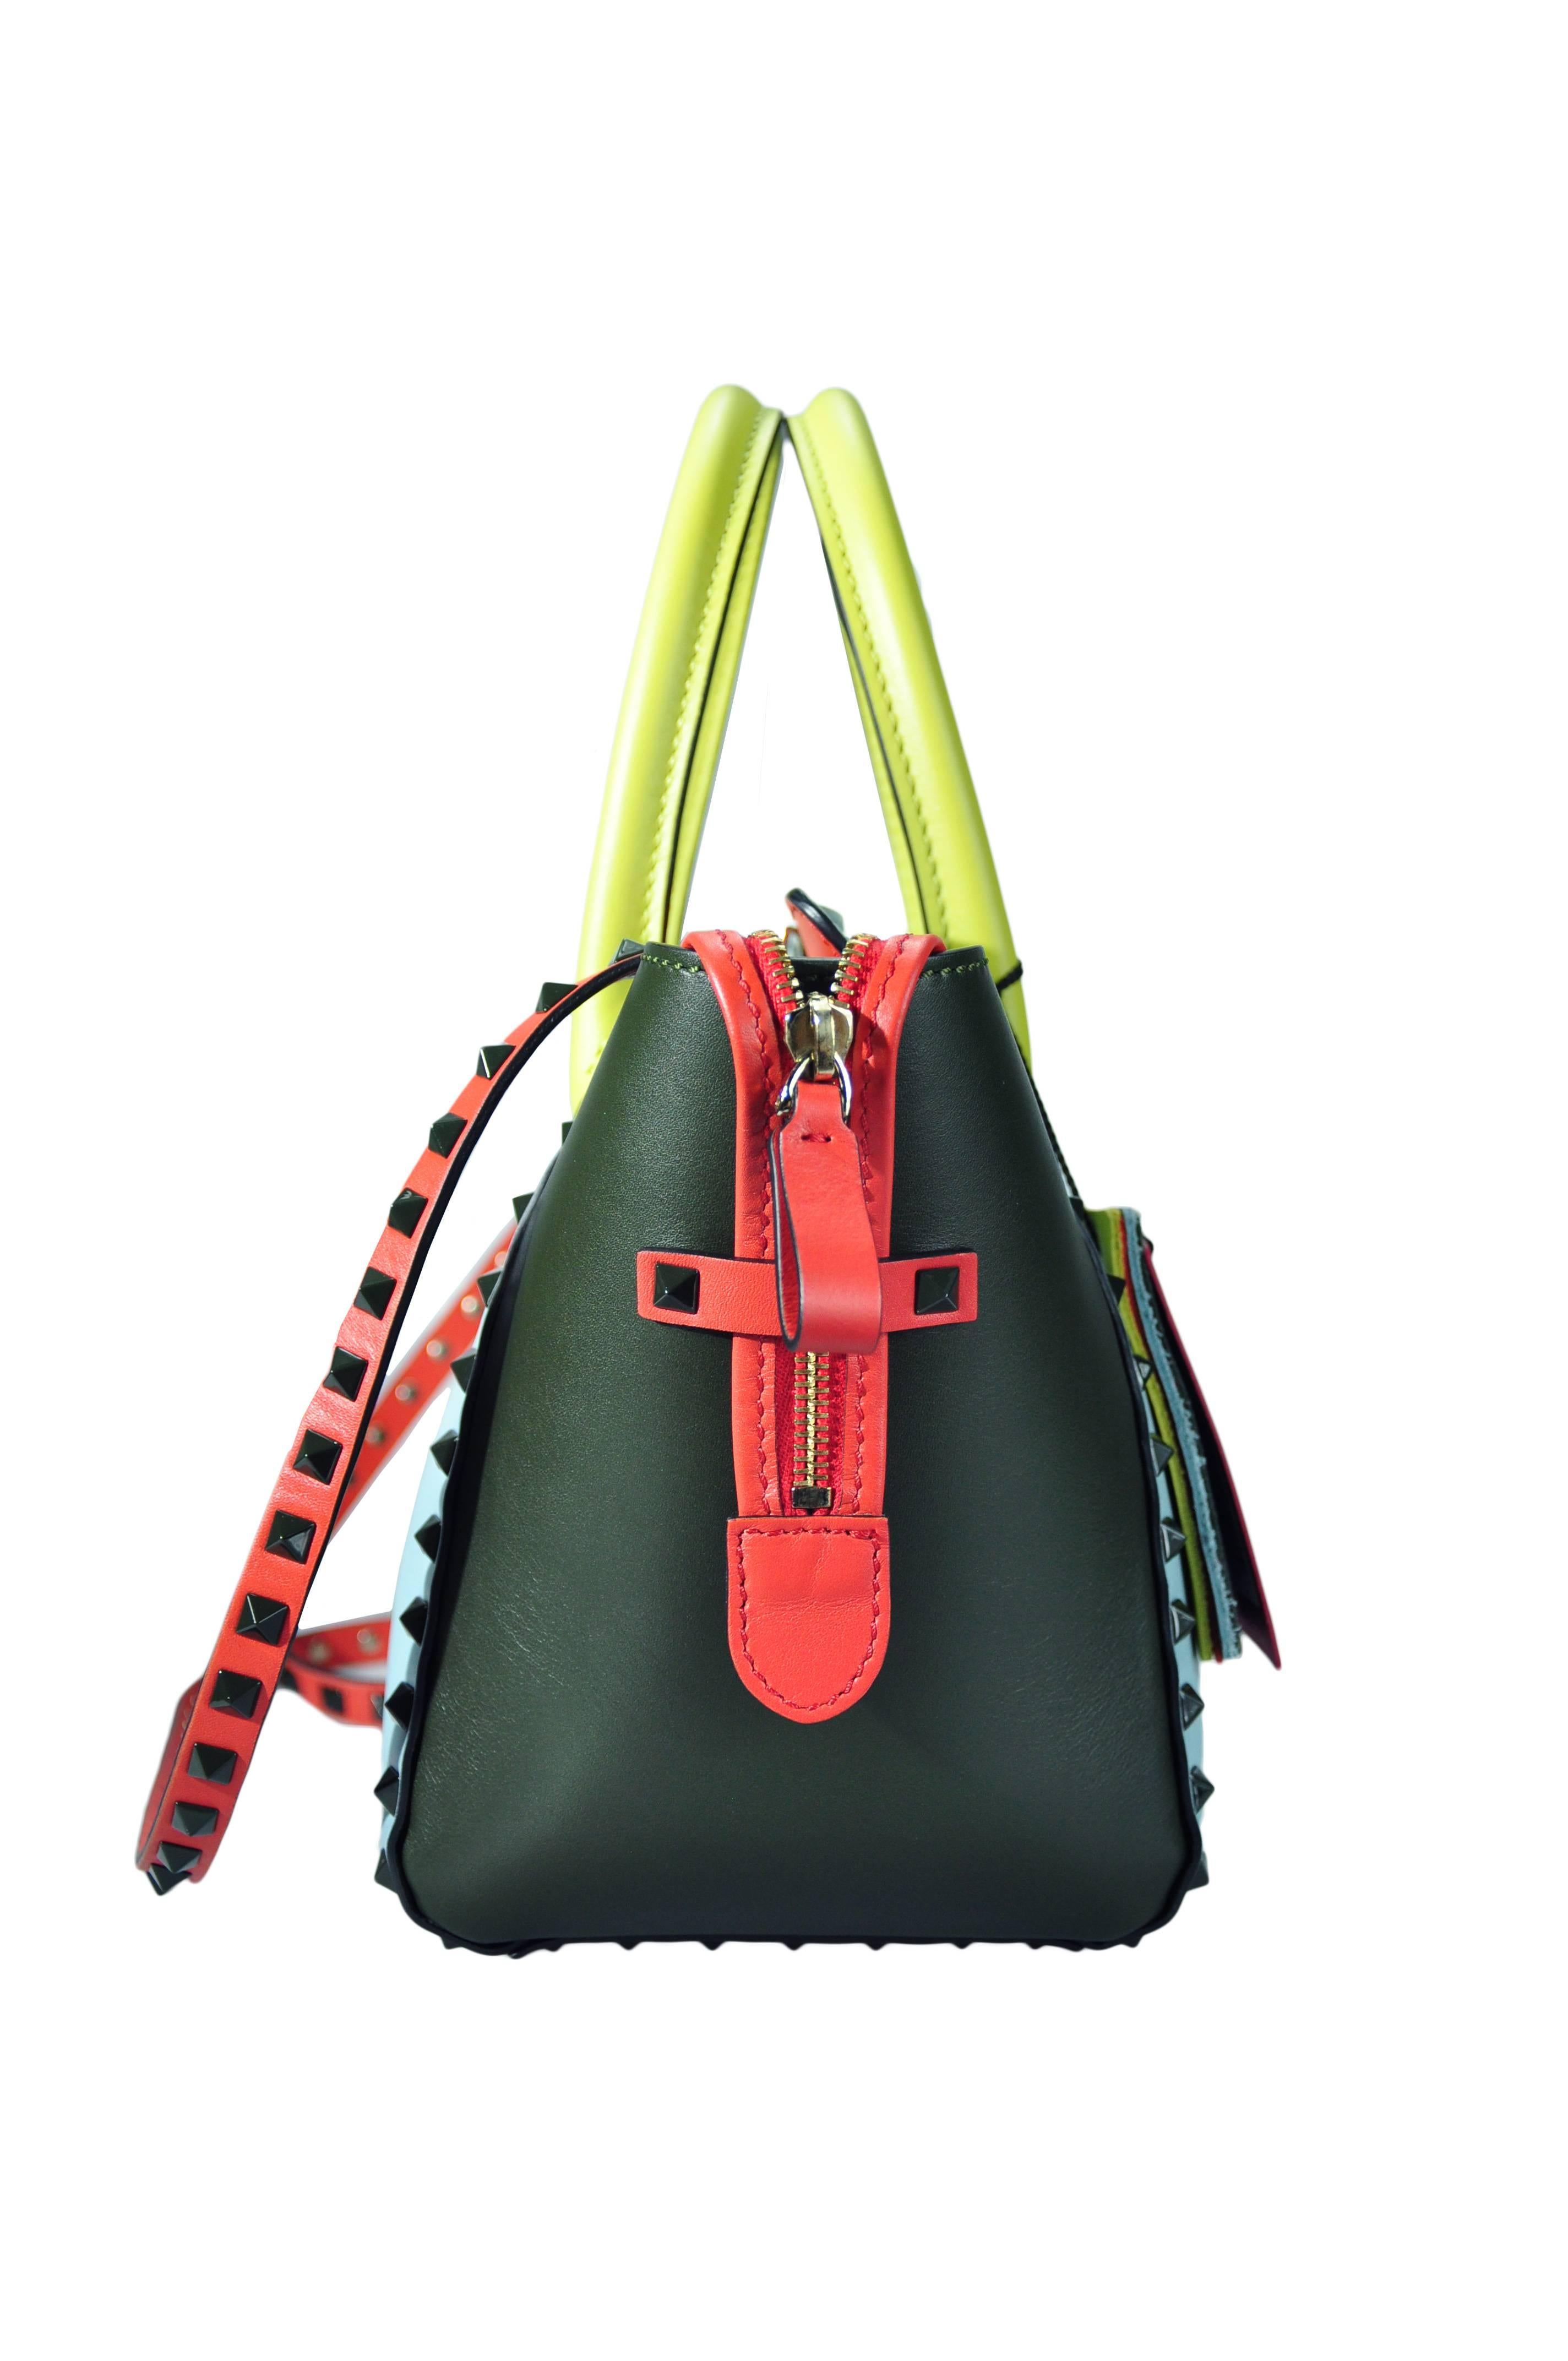 A Valentino Garavani Rockstud small trapeze tote bag in multi-colored calfskin, sky-blue, charcoal grey, red and yellow. Deep army lacquered studs with metal flip lock closure and zip fastening closure. Detachable studded strap, nappa lining, one